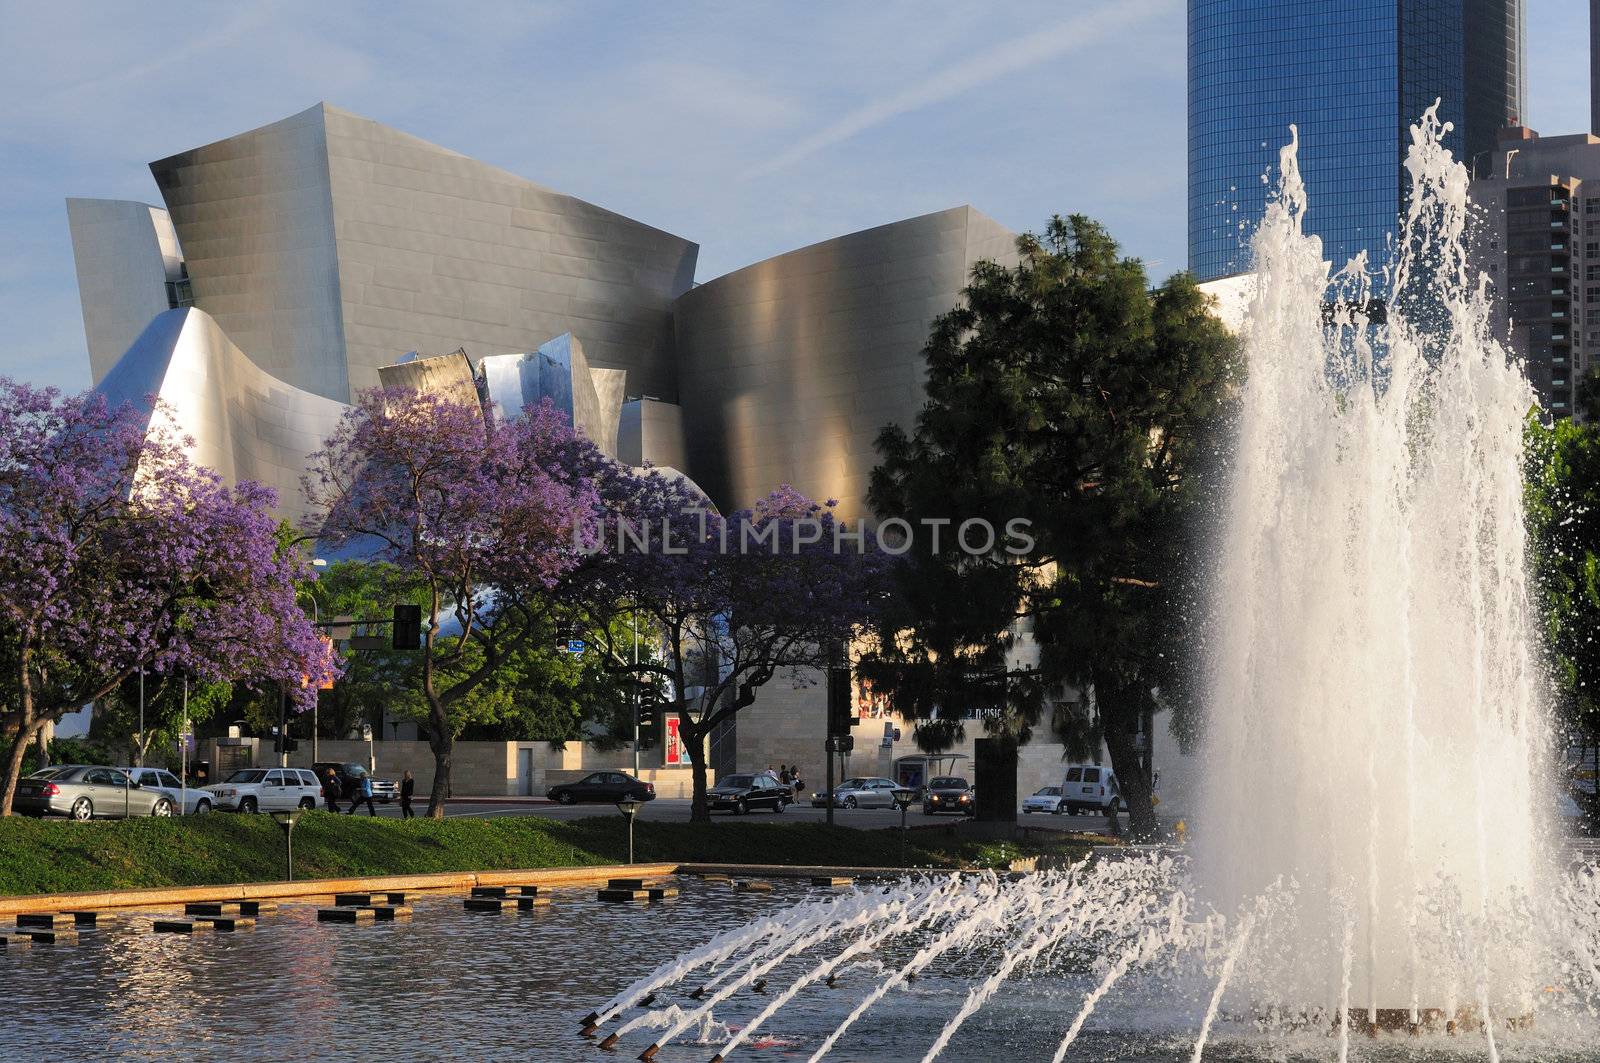 Los Angeles Philharmonic Orchestra venue (Walt Disney Concert Hall) with jacaranda trees and fountain in foreground